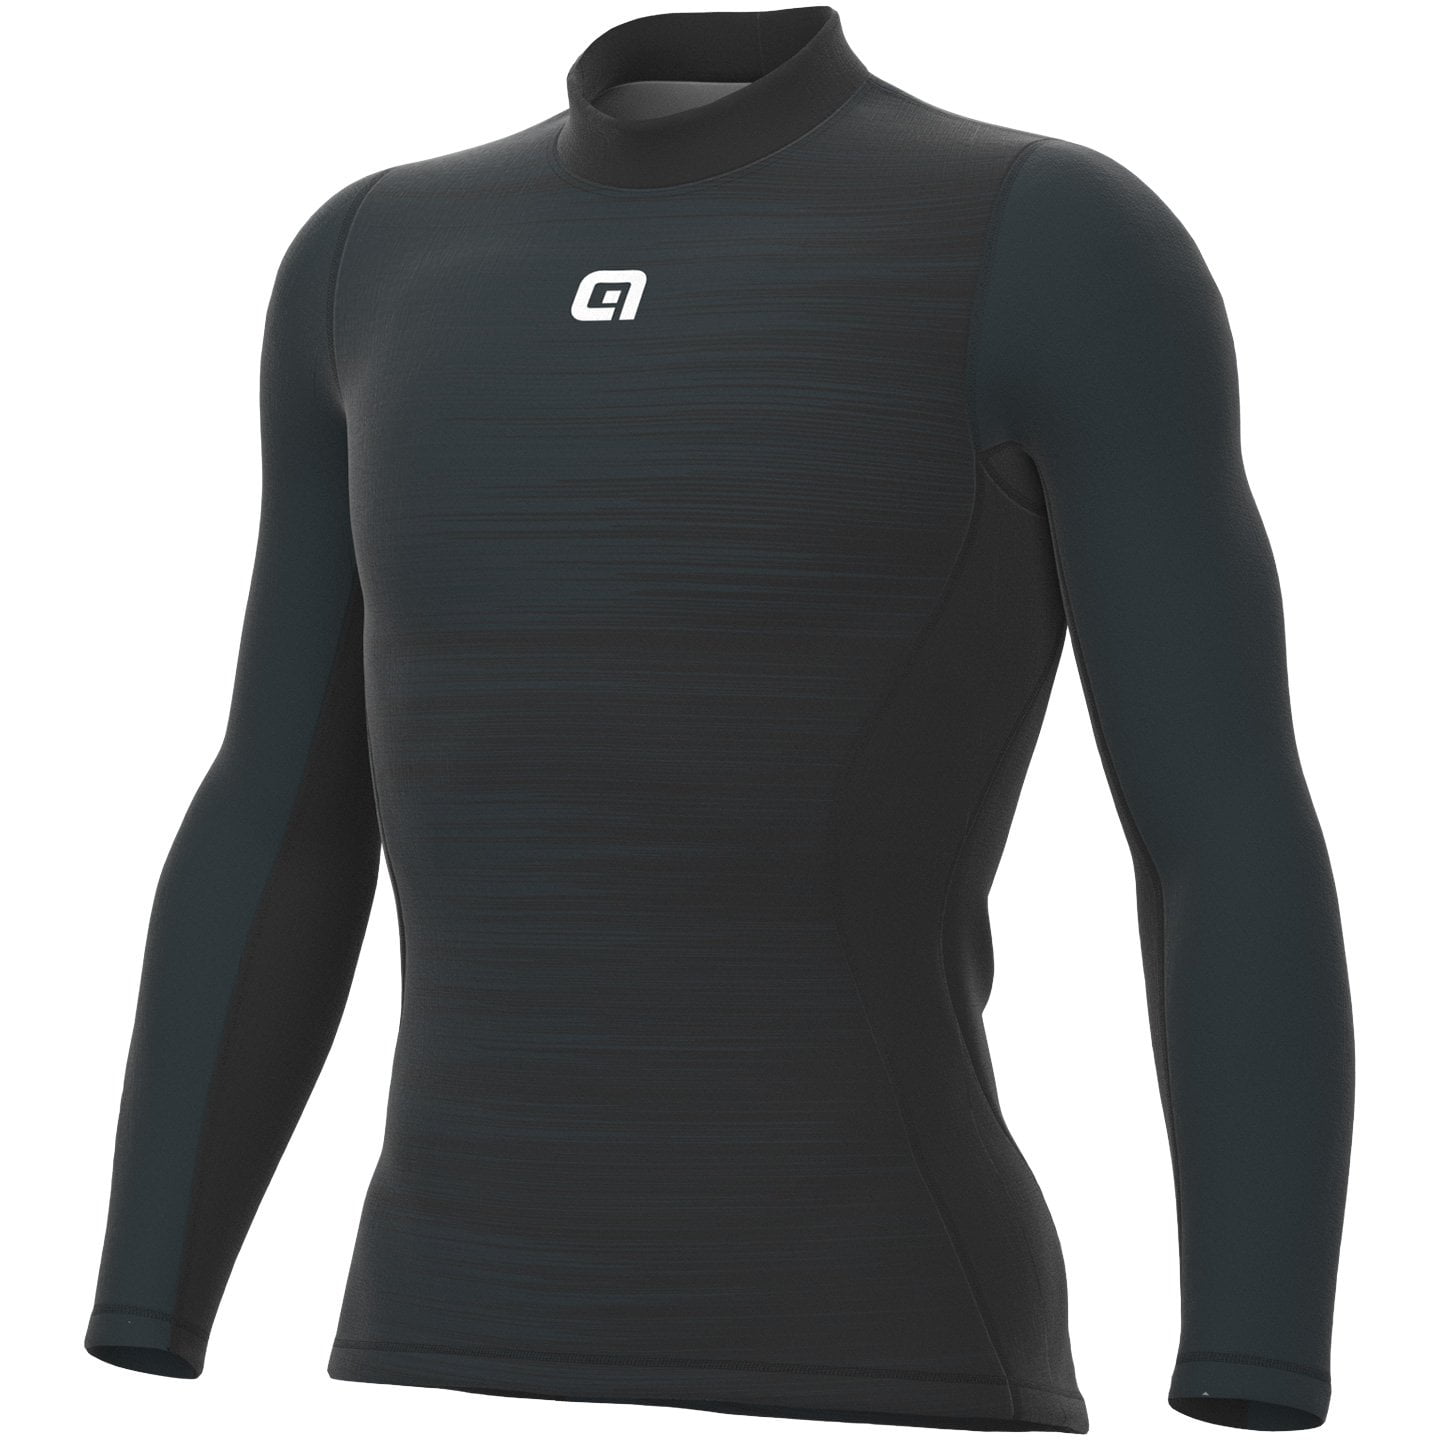 ALE Shade Long Sleeve Cycling Base Layer Base Layer, for men, size M-L